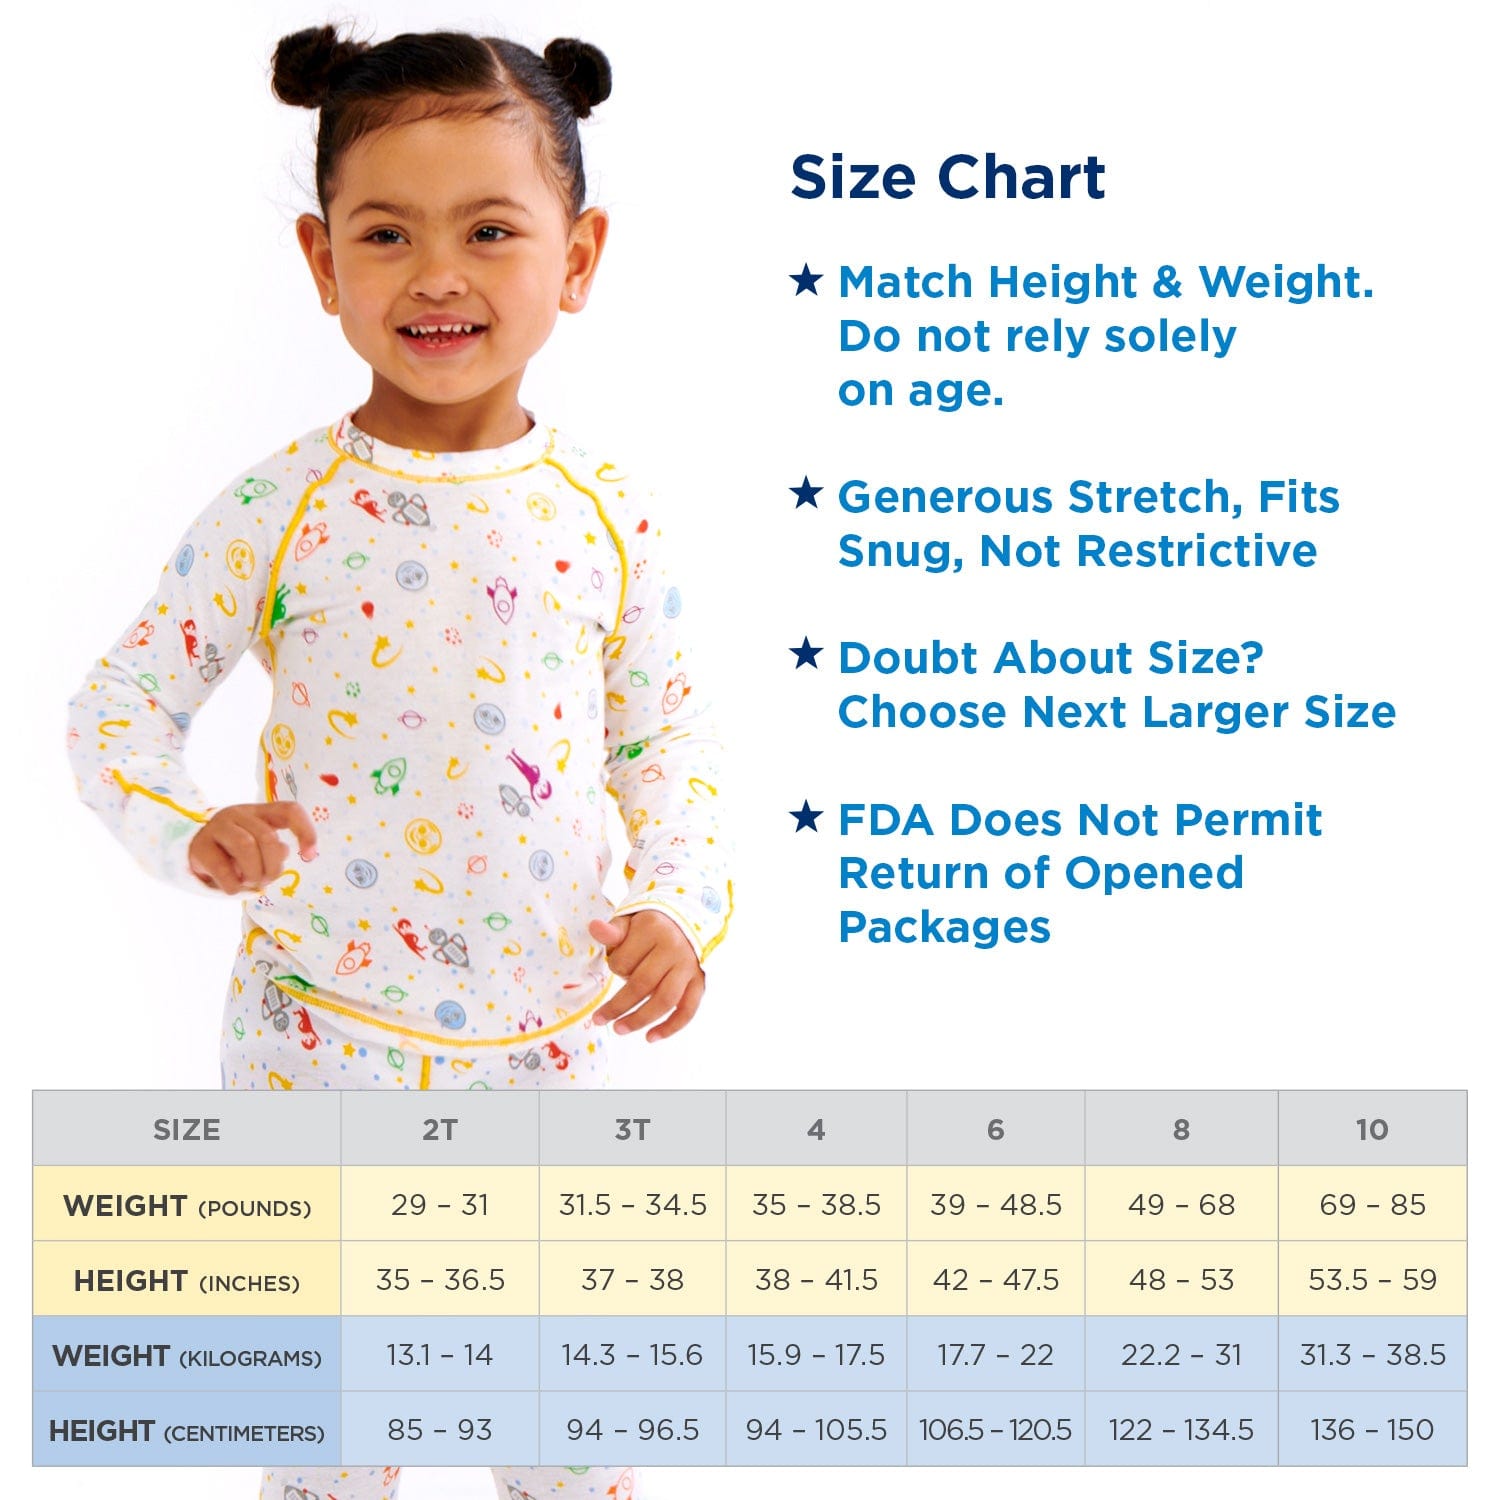 "Eczema Pajamas Shirt for Toddlers and Kids in Sizes 2T, 3T, 4, 6, 8, 10 for Wet Wrap Therapy"